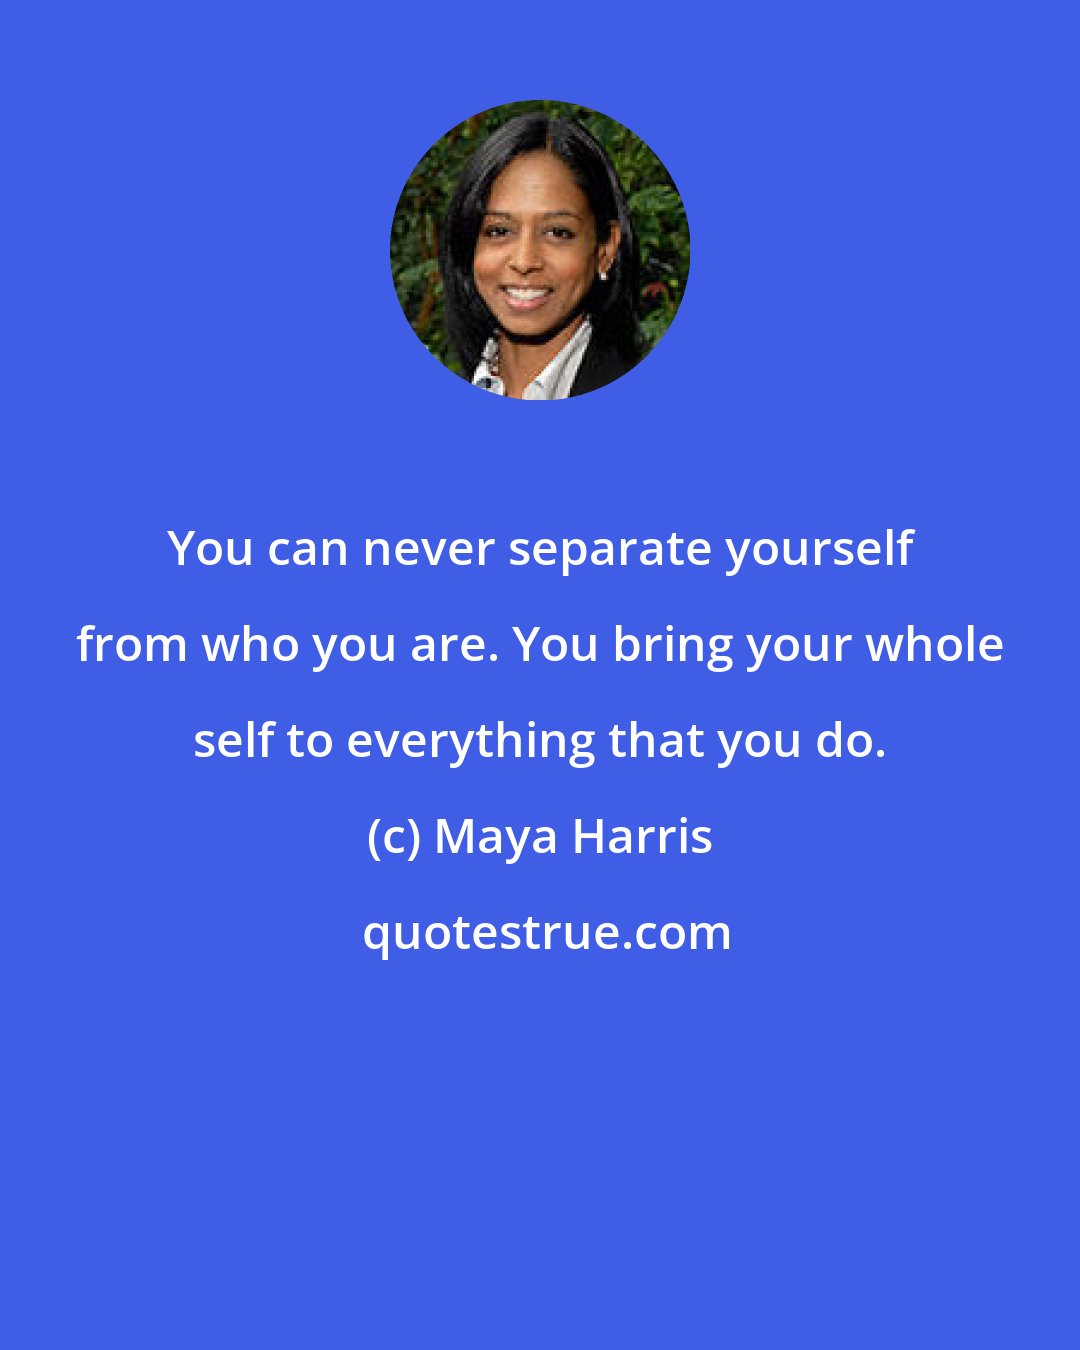 Maya Harris: You can never separate yourself from who you are. You bring your whole self to everything that you do.